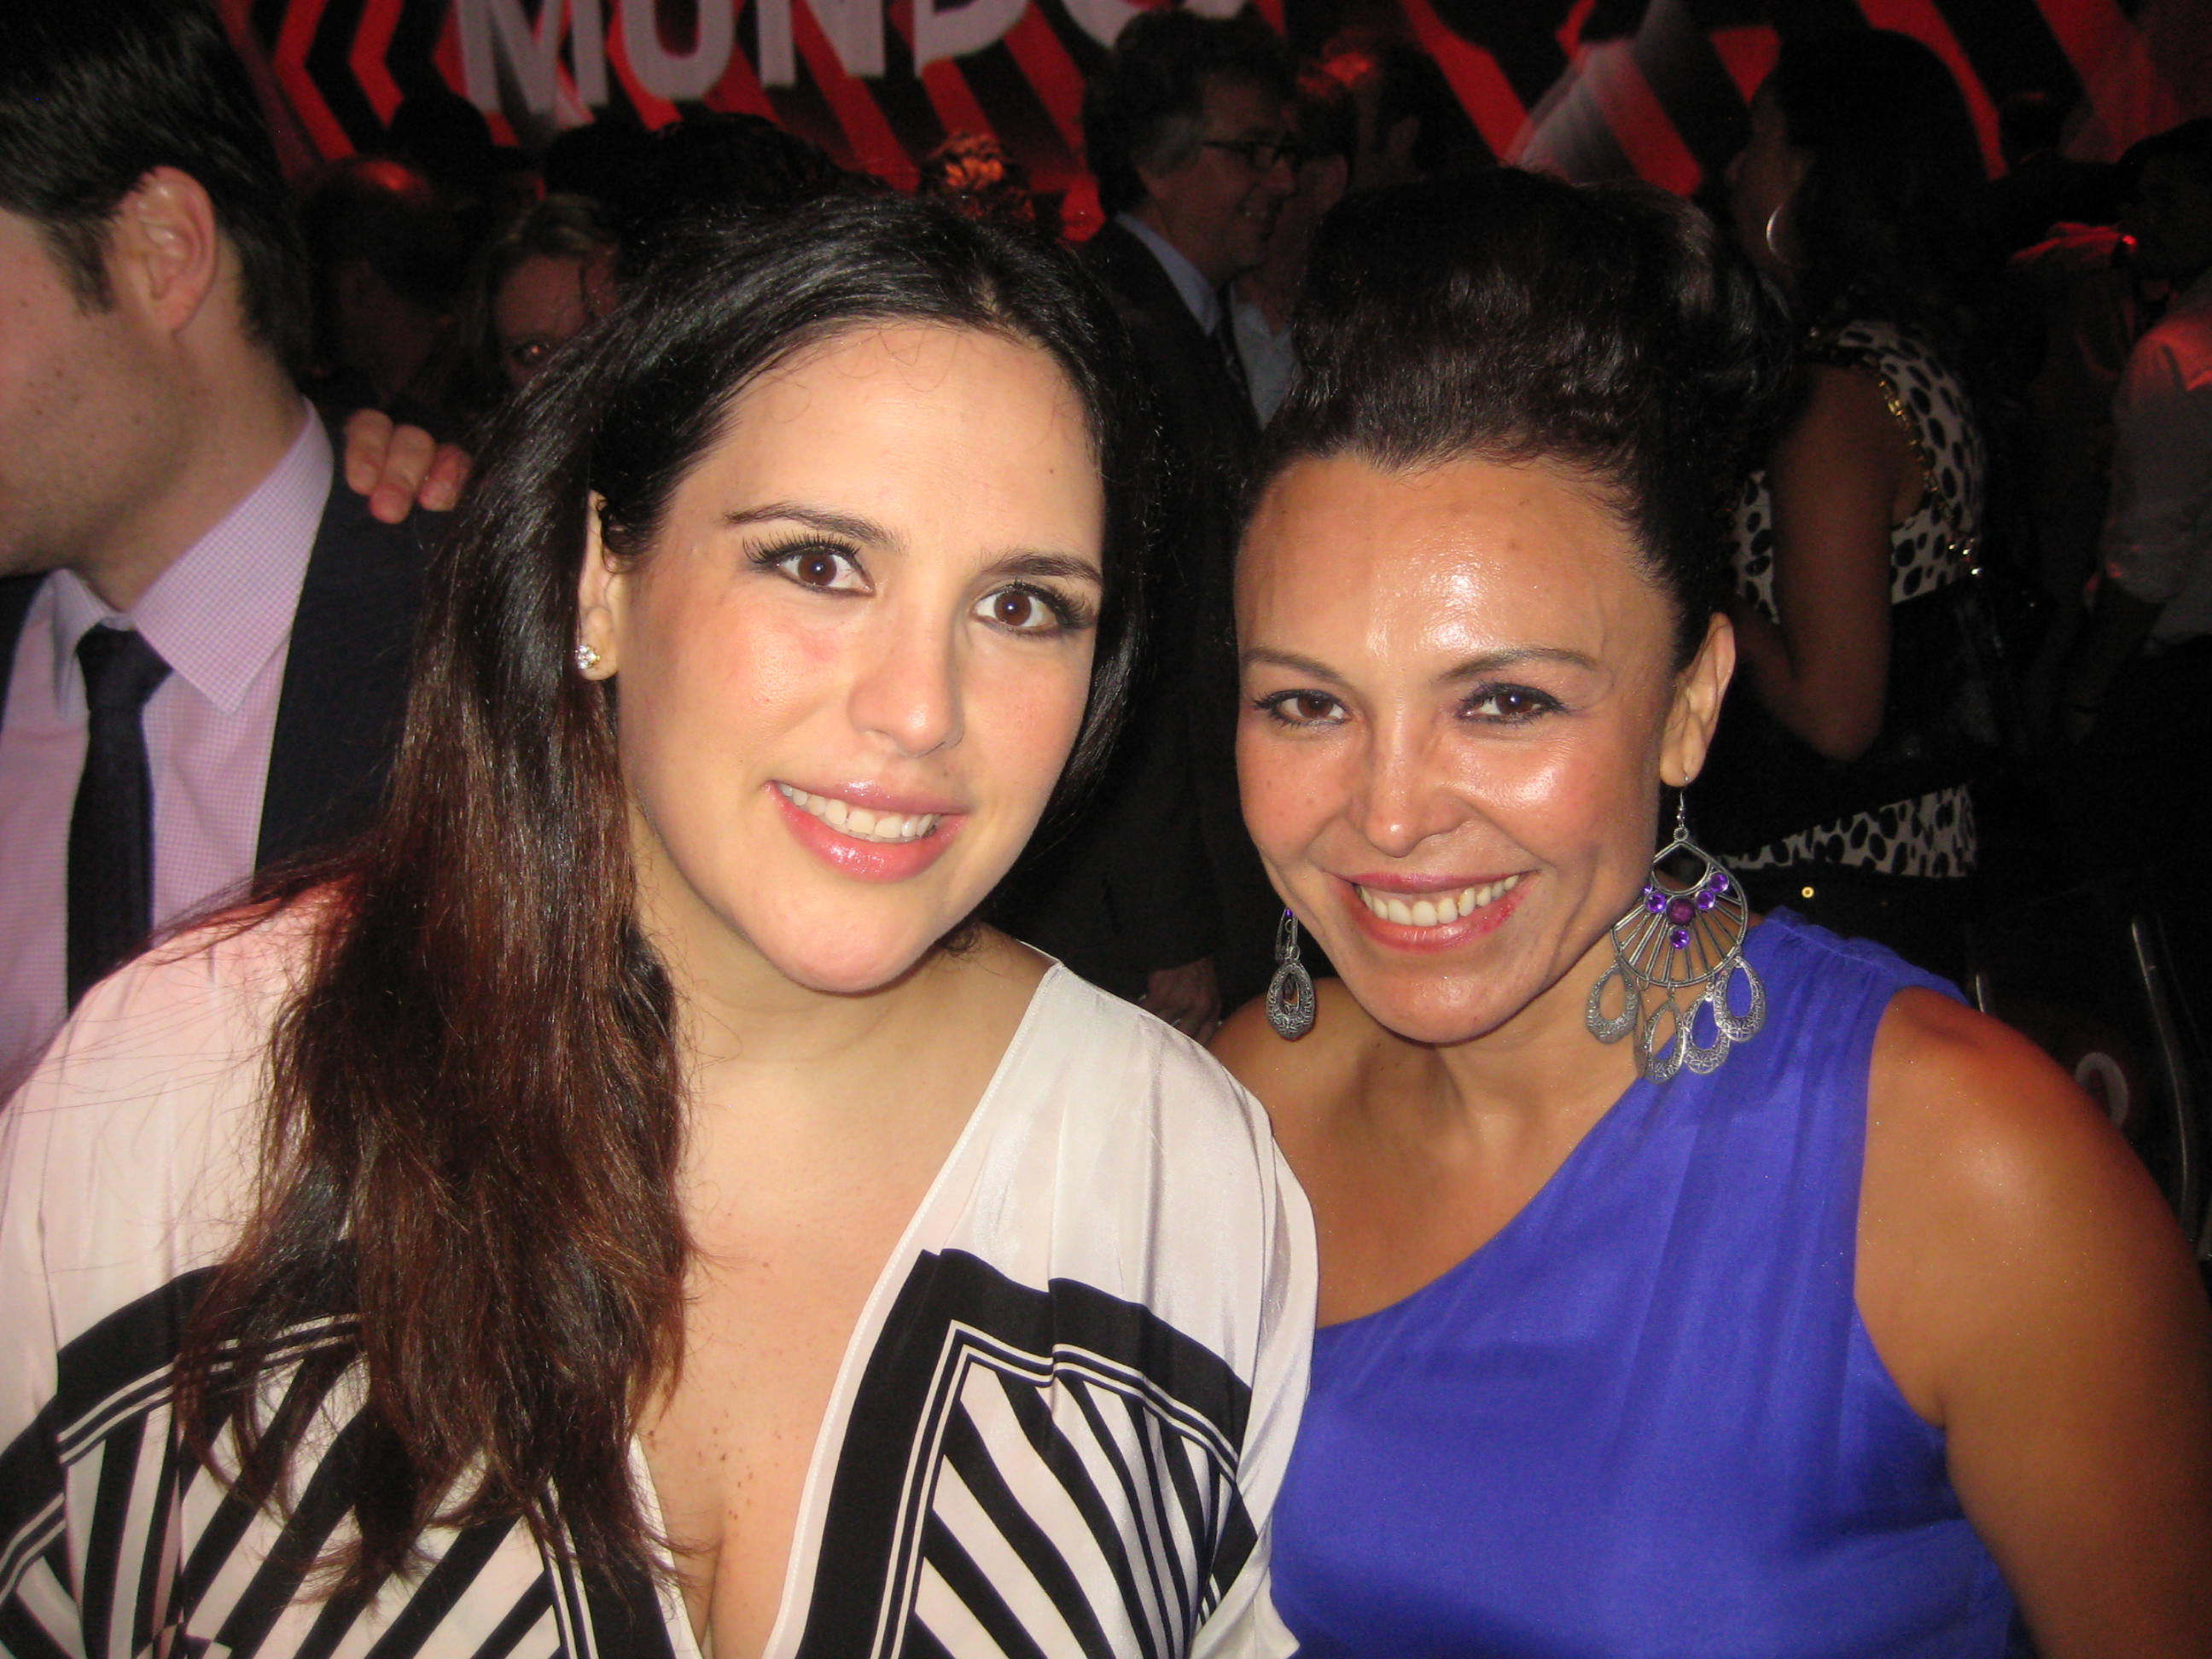 Sandra Santiago With Angelica Vale at Mundo Fox Launch red carpet in Los Angeles California http://www.sandrasantiago.com http://www.sandrasantiago.com https://www.facebook.com/SandraSantiago.page?ref=hl https://twitter.com/SandraSantiago_